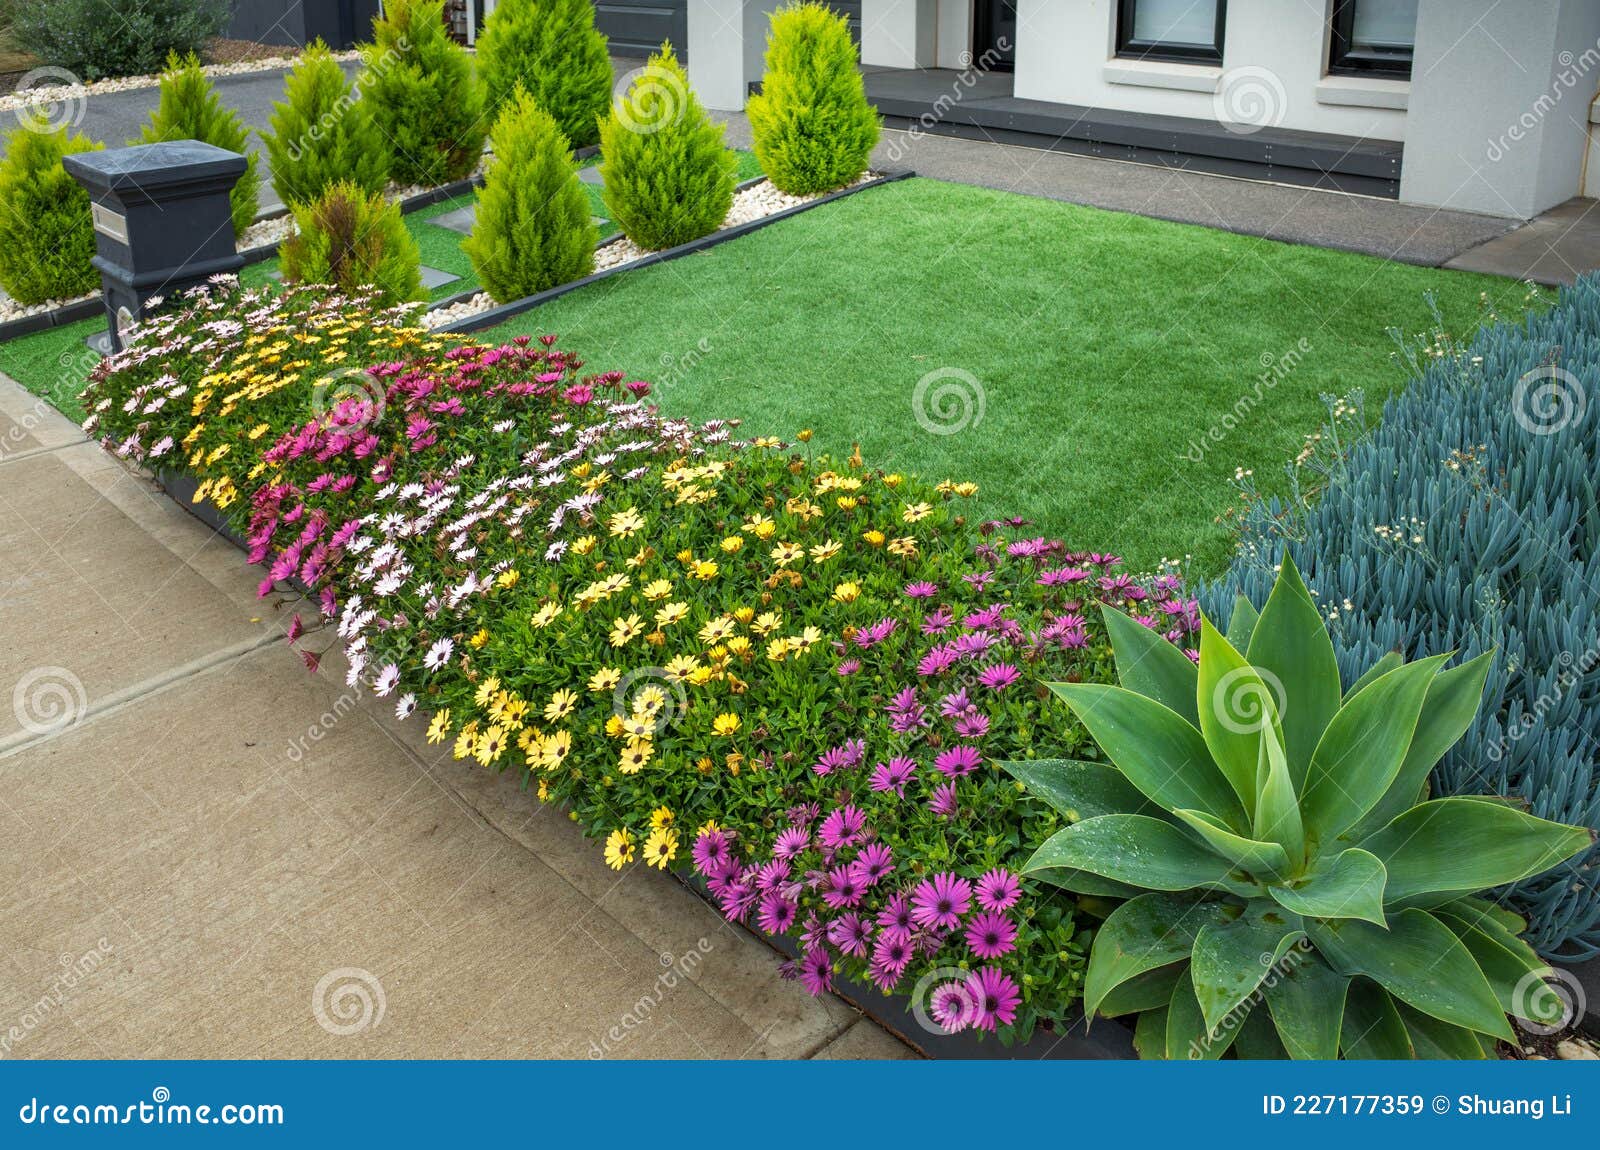 A Landscaped Small Front Yard With Different Plants And Synthetic Turf Stock Image Image Of Design Driveway  - Garden Ideas For Small Front Yard Australia